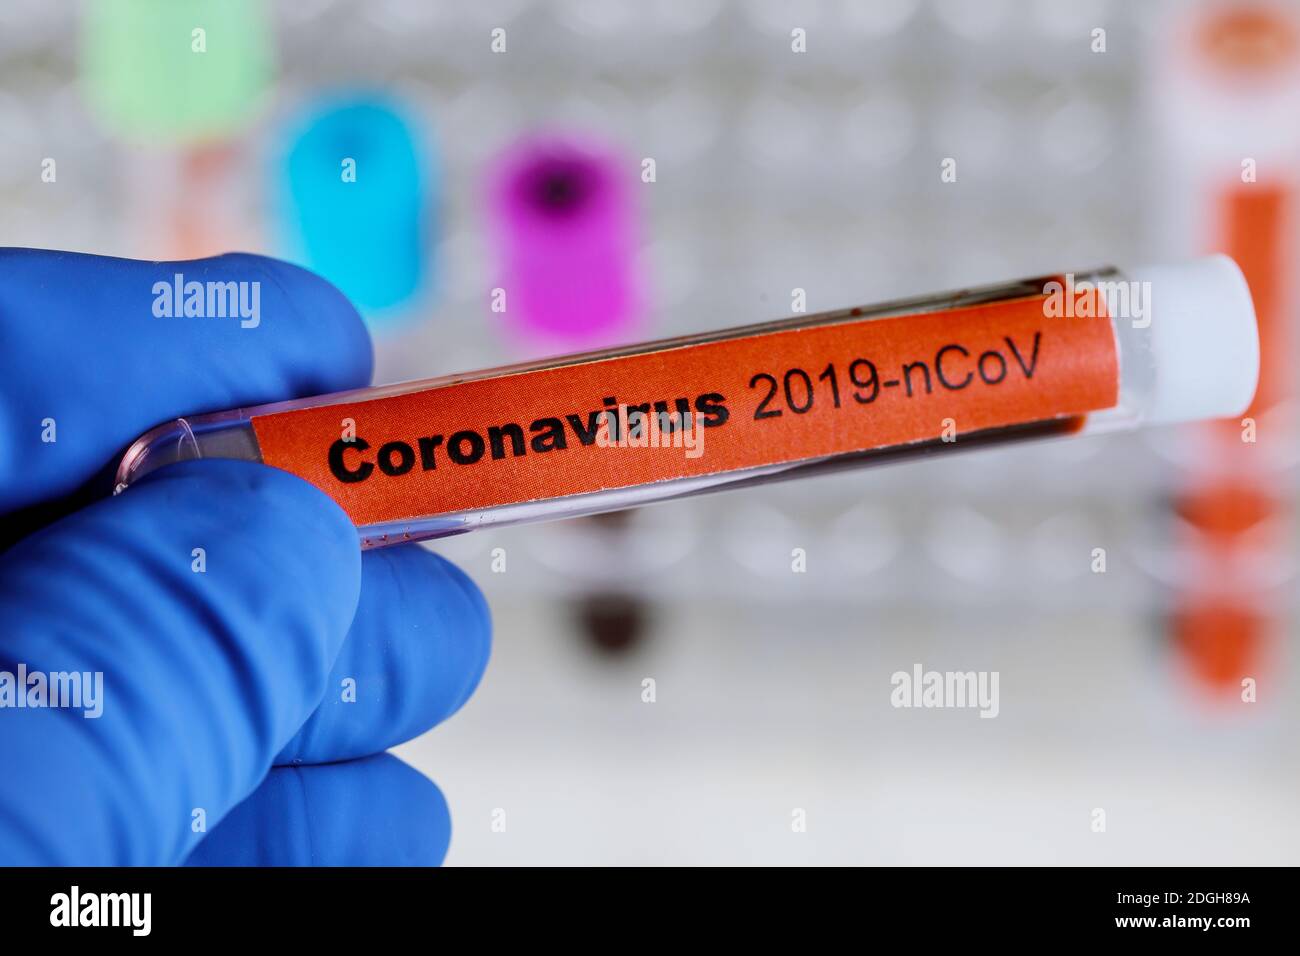 2019-nCoV Middle East respiratory syndrome coronavirus with blood sample Stock Photo